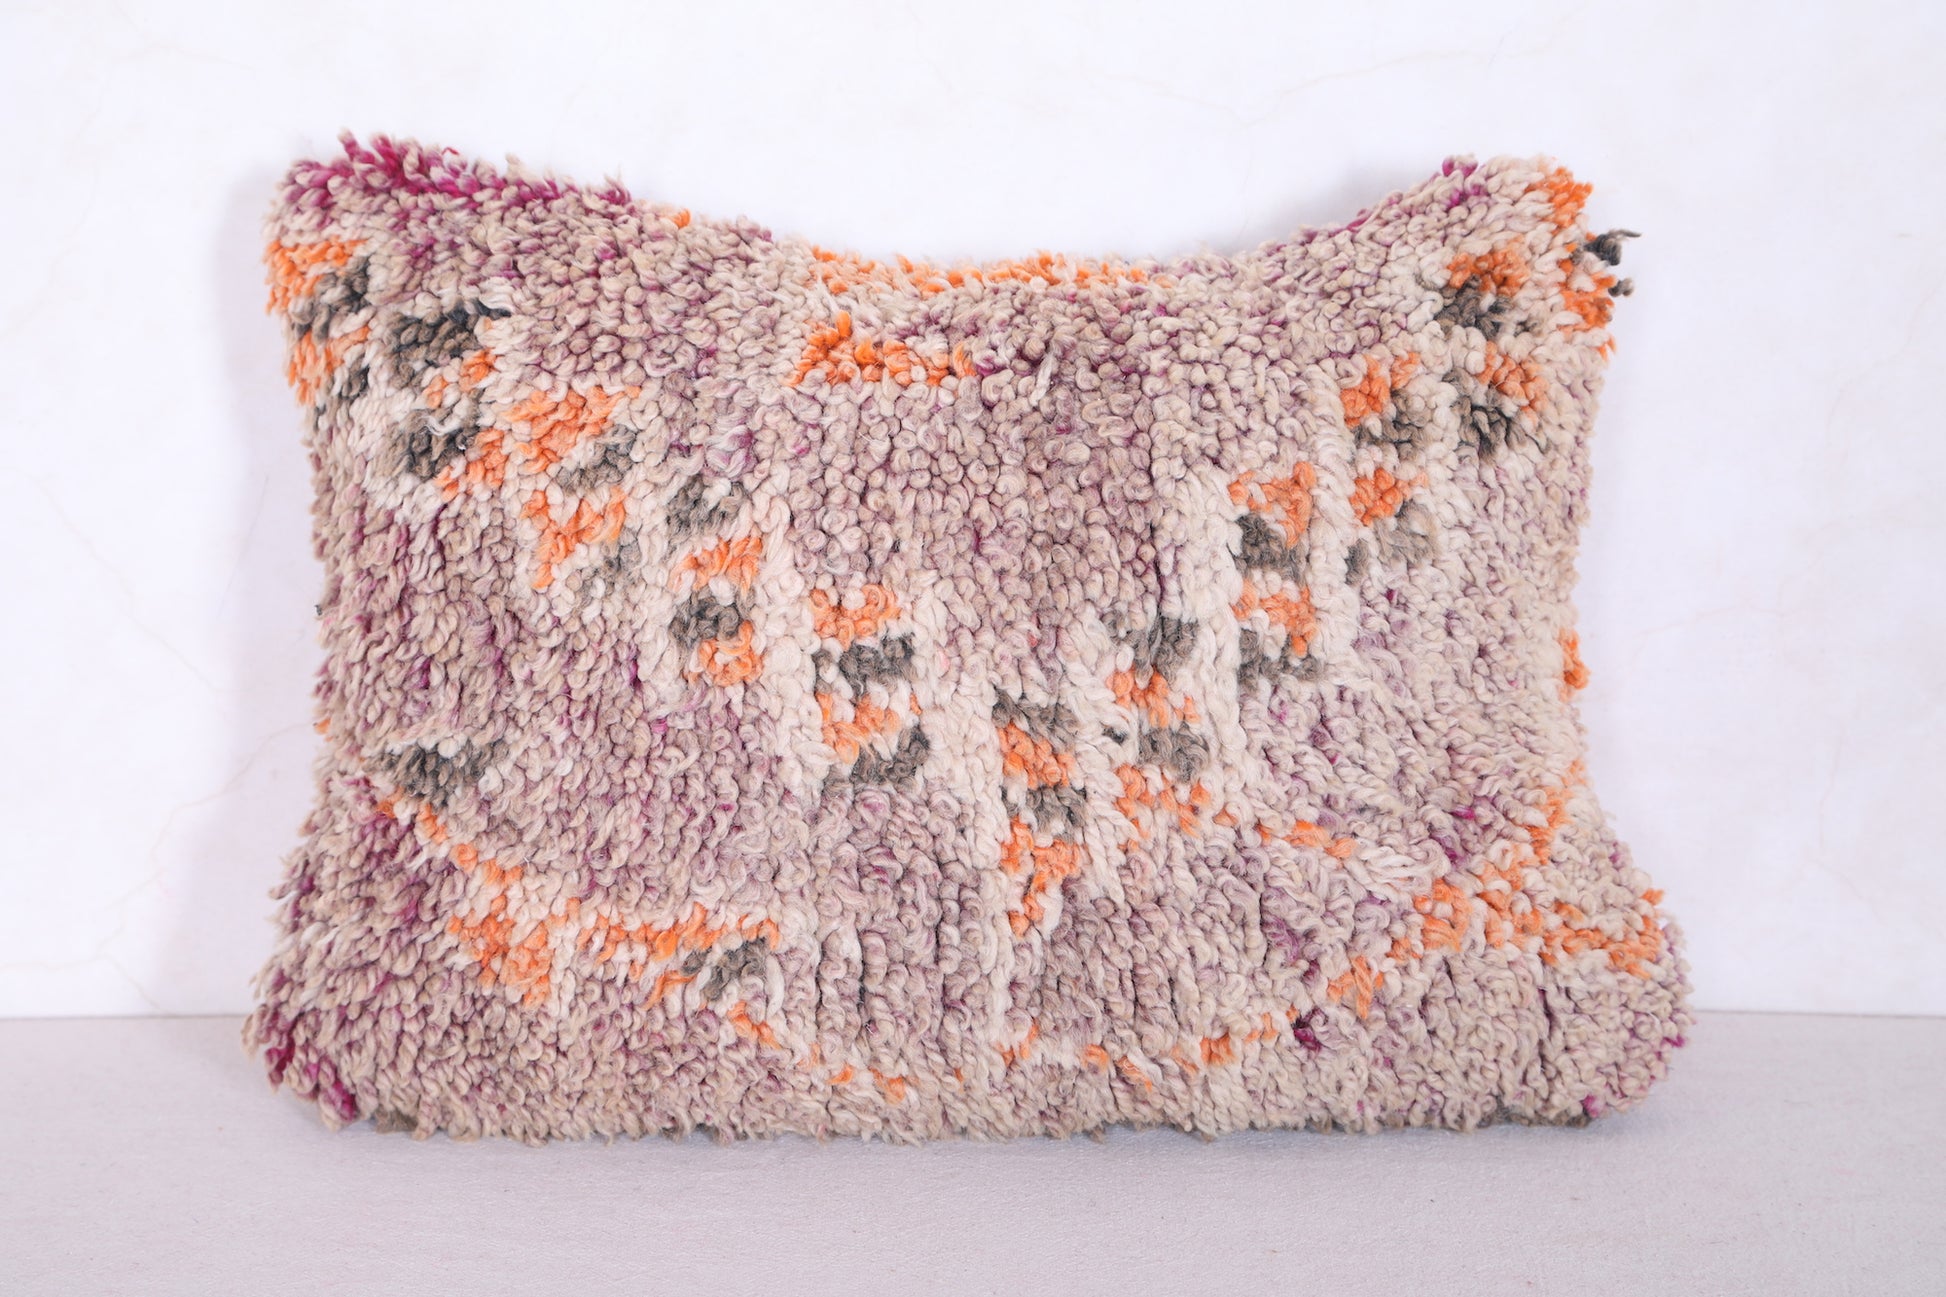 Moroccan handmade kilim pillow 13.7 INCHES X 18.1 INCHES